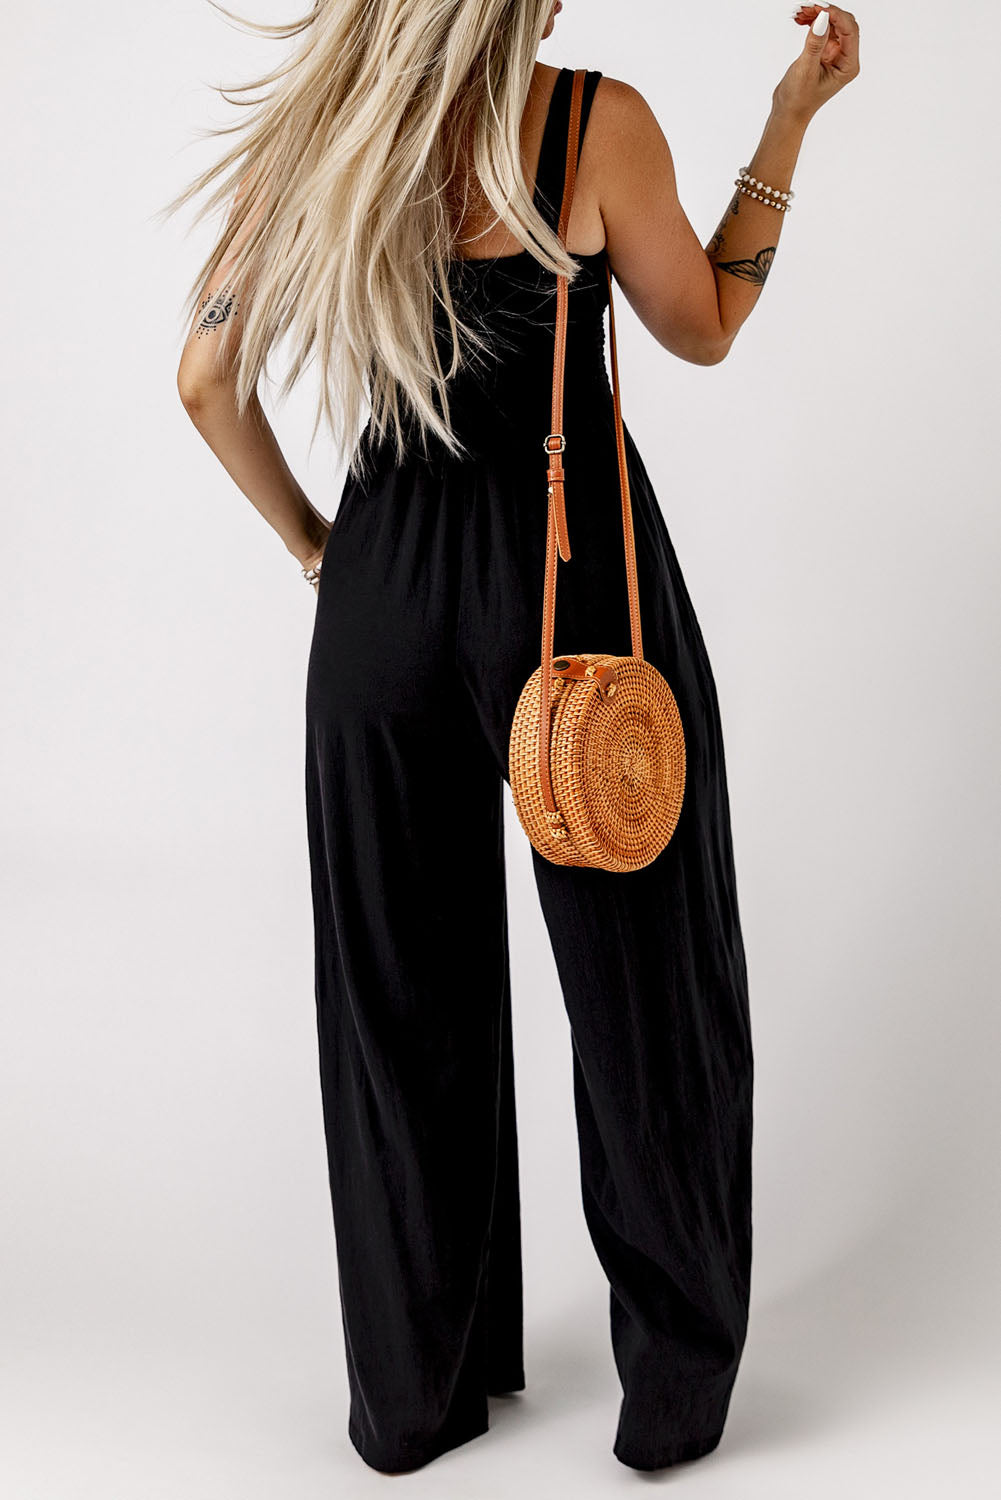 Buy Smocked Square Neck Wide Leg Jumpsuit with Pockets by Faz